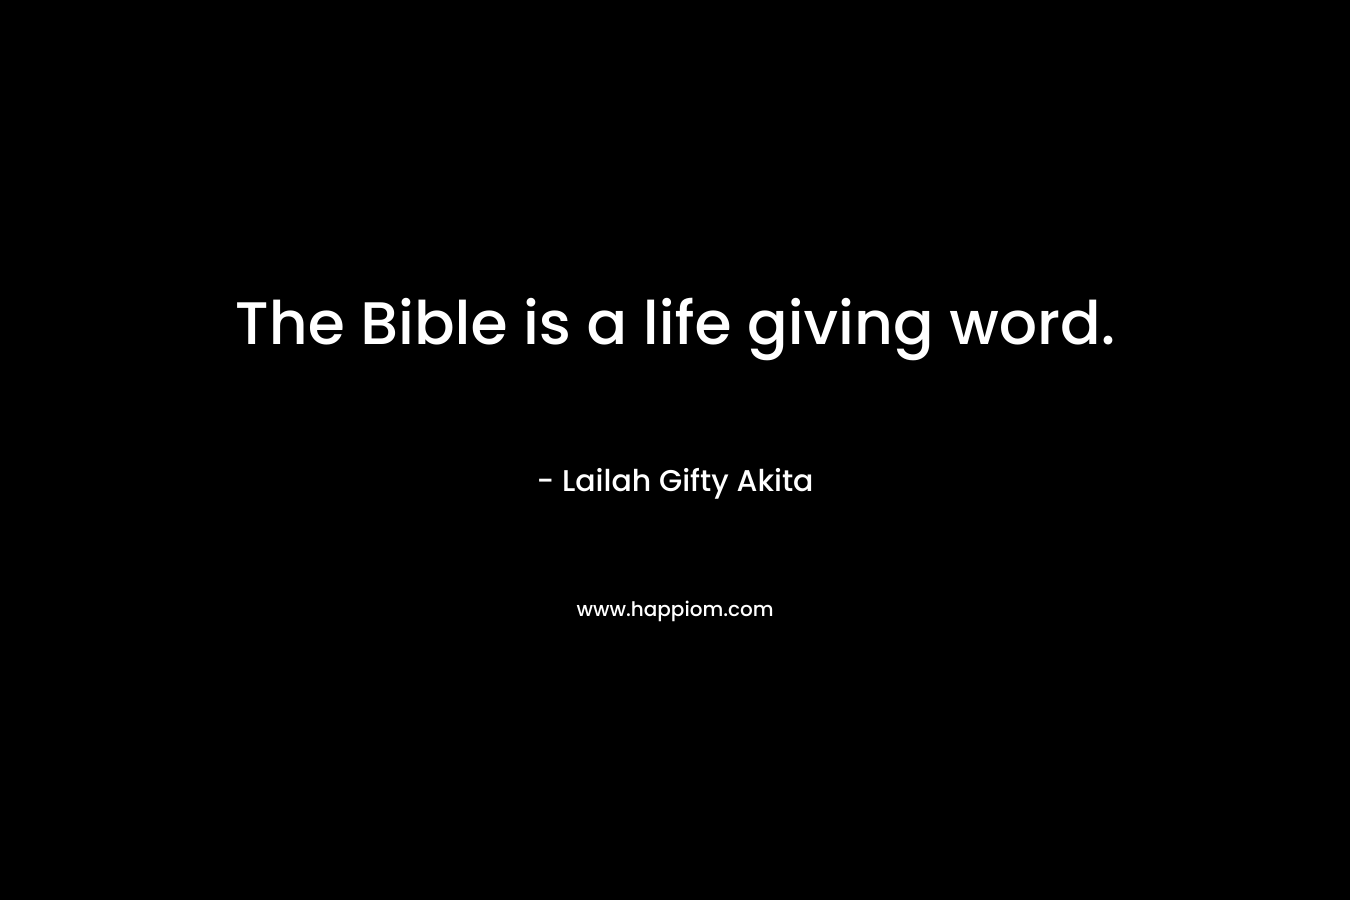 The Bible is a life giving word.